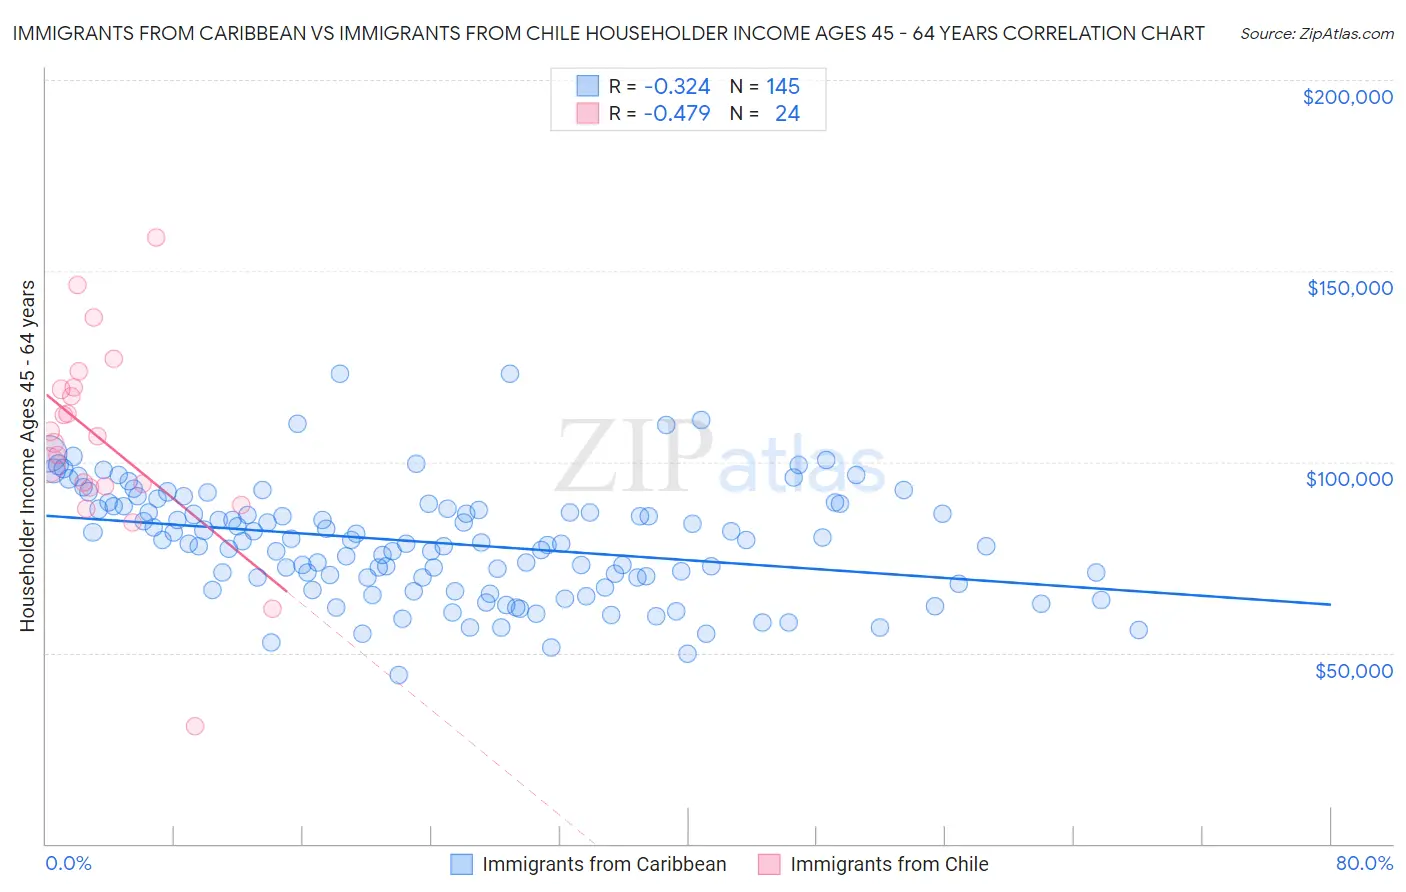 Immigrants from Caribbean vs Immigrants from Chile Householder Income Ages 45 - 64 years